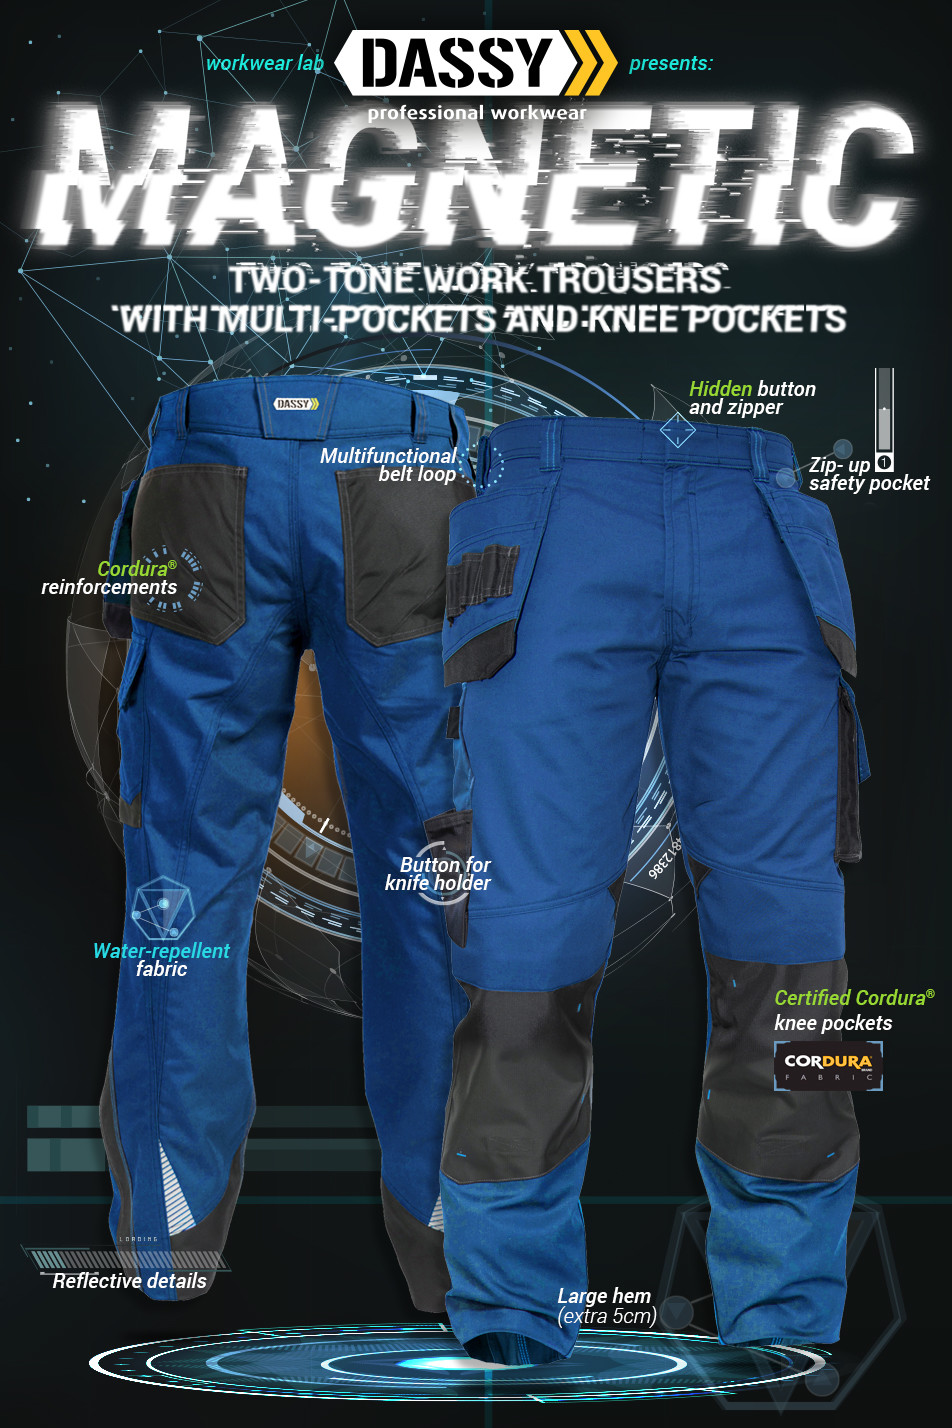 Dassy Magnetic TWO-TONE WORK TROUSERS WITH MULTI-POCKETS AND KNEE POCKETS